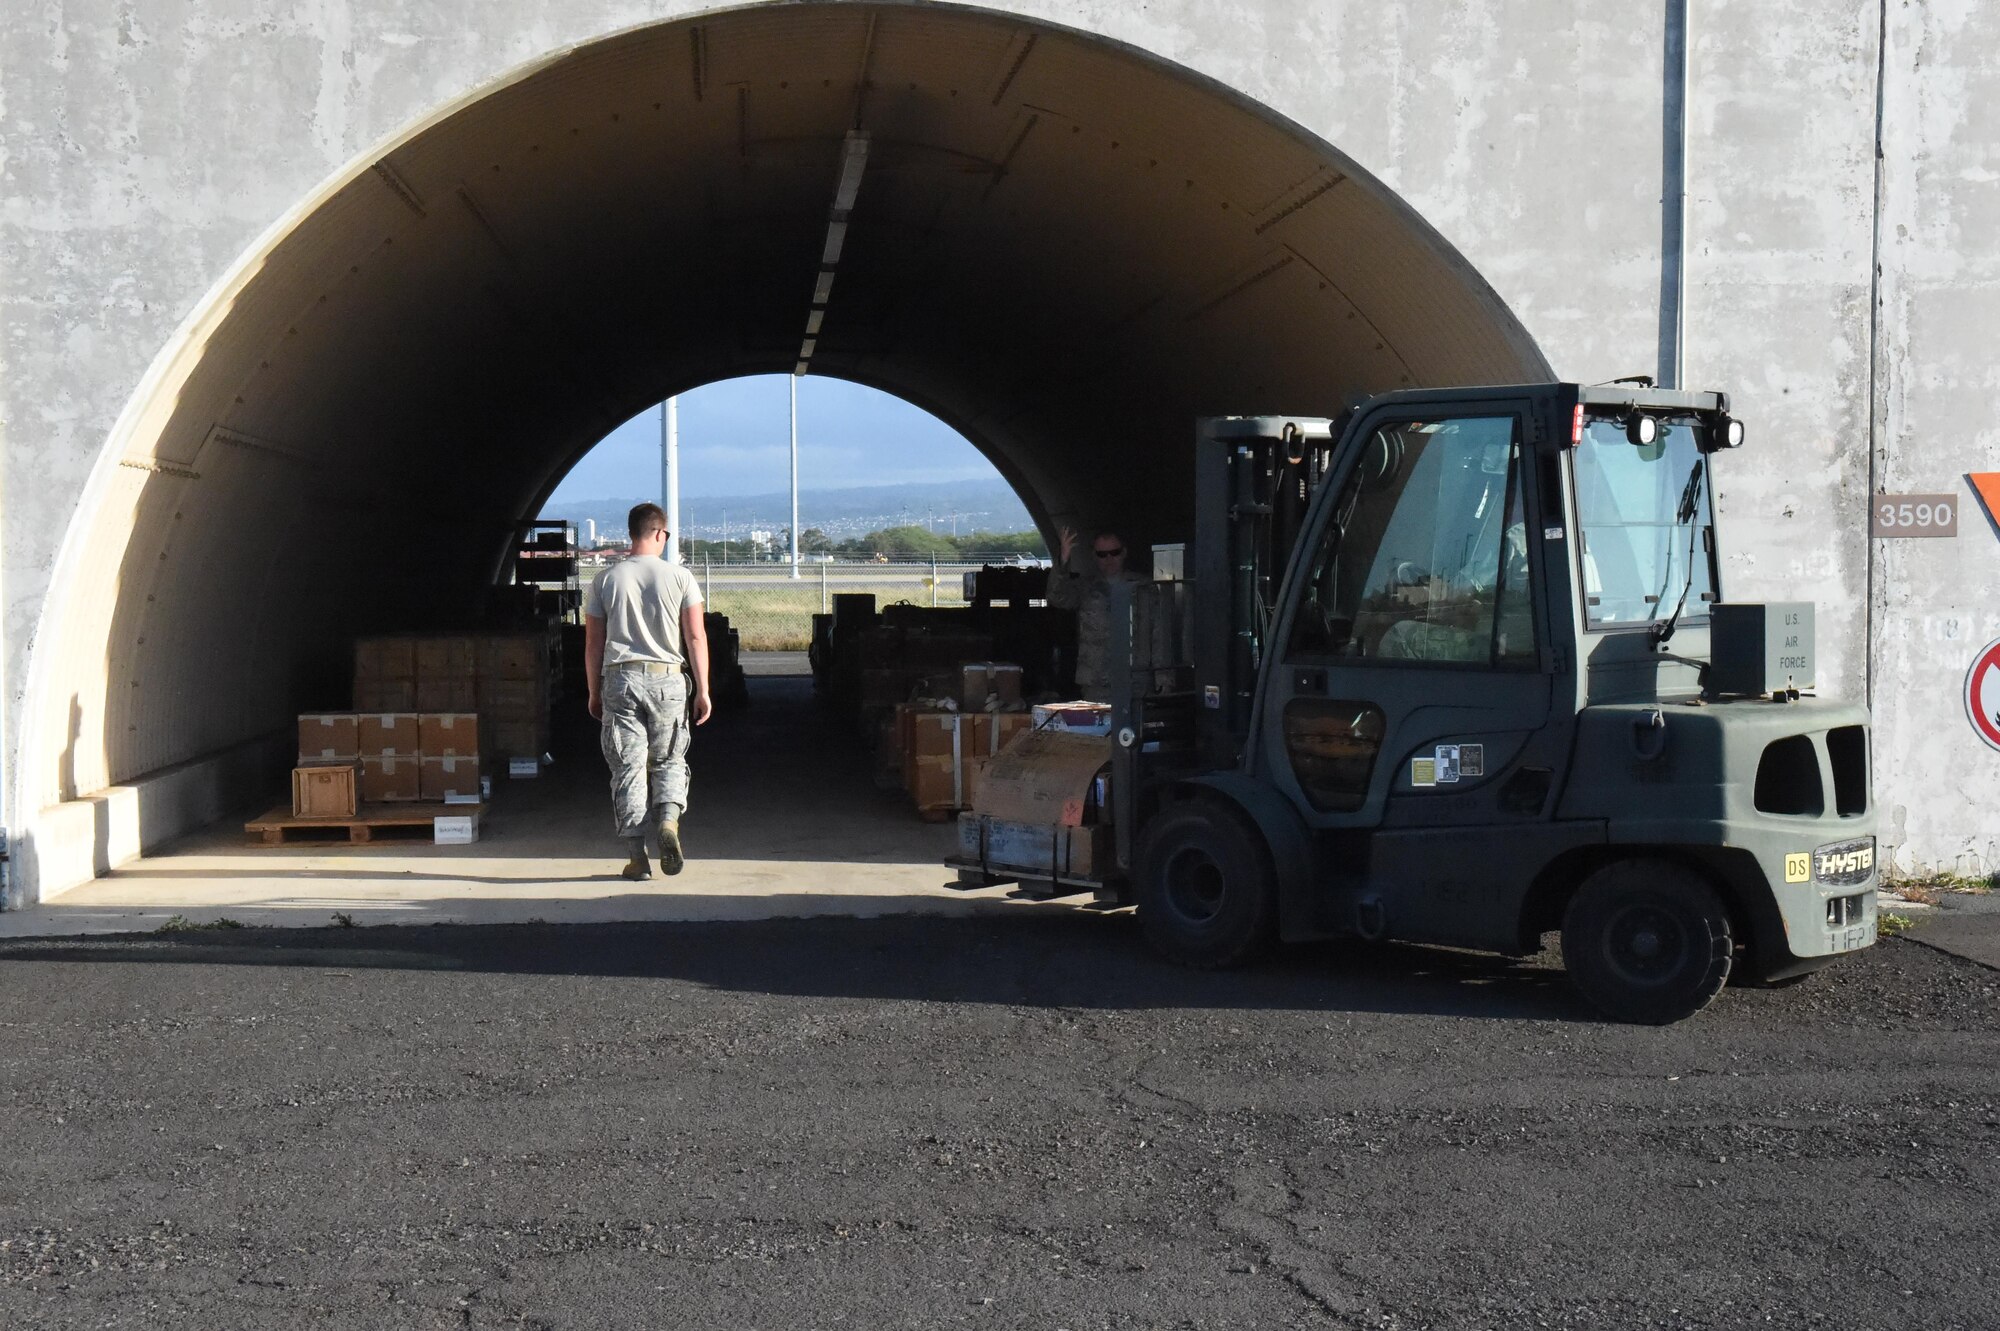 On February 11, 2017, roughly 40 members of the 132nd Wing consisting of Logistics Readiness Squadron (LRS), Safety and Finance participated in a 15 day Deployment for Training (DFT) opportunity at the 154th Wing, Hawaii Air National Guard (HANG) at Hickam Field, Hawaii.